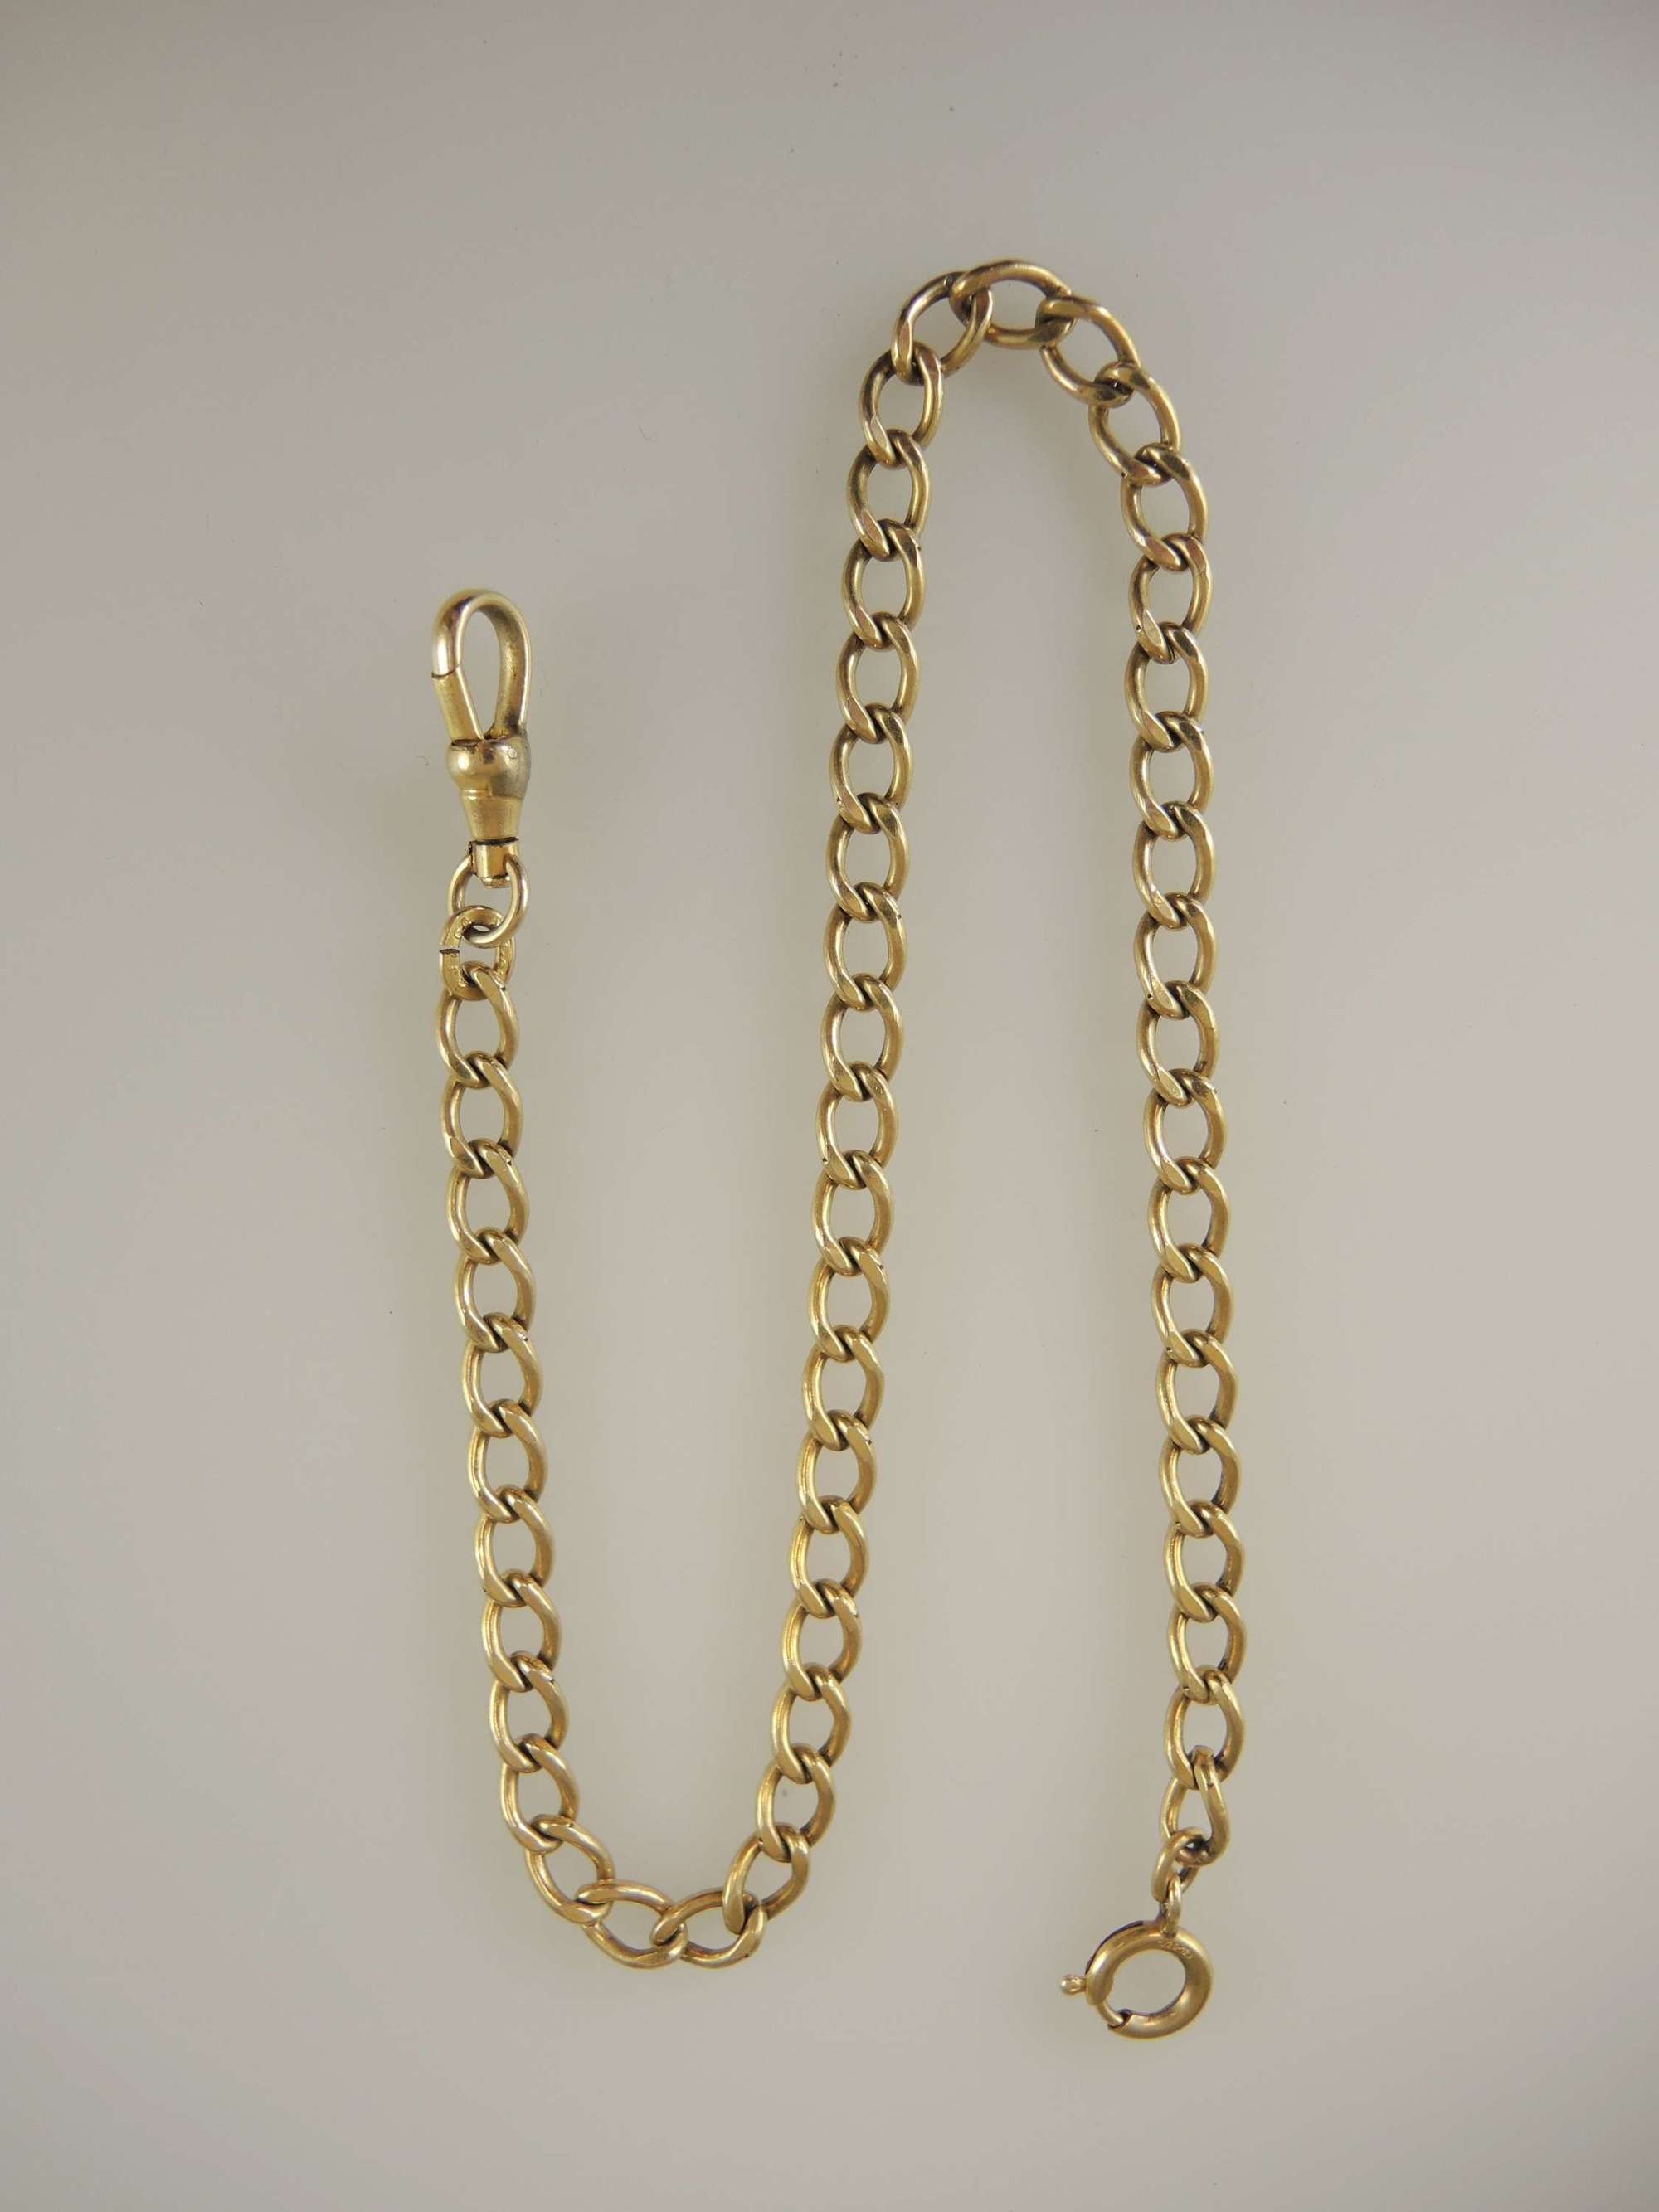 Good 12K Gold filled watch chain c1910